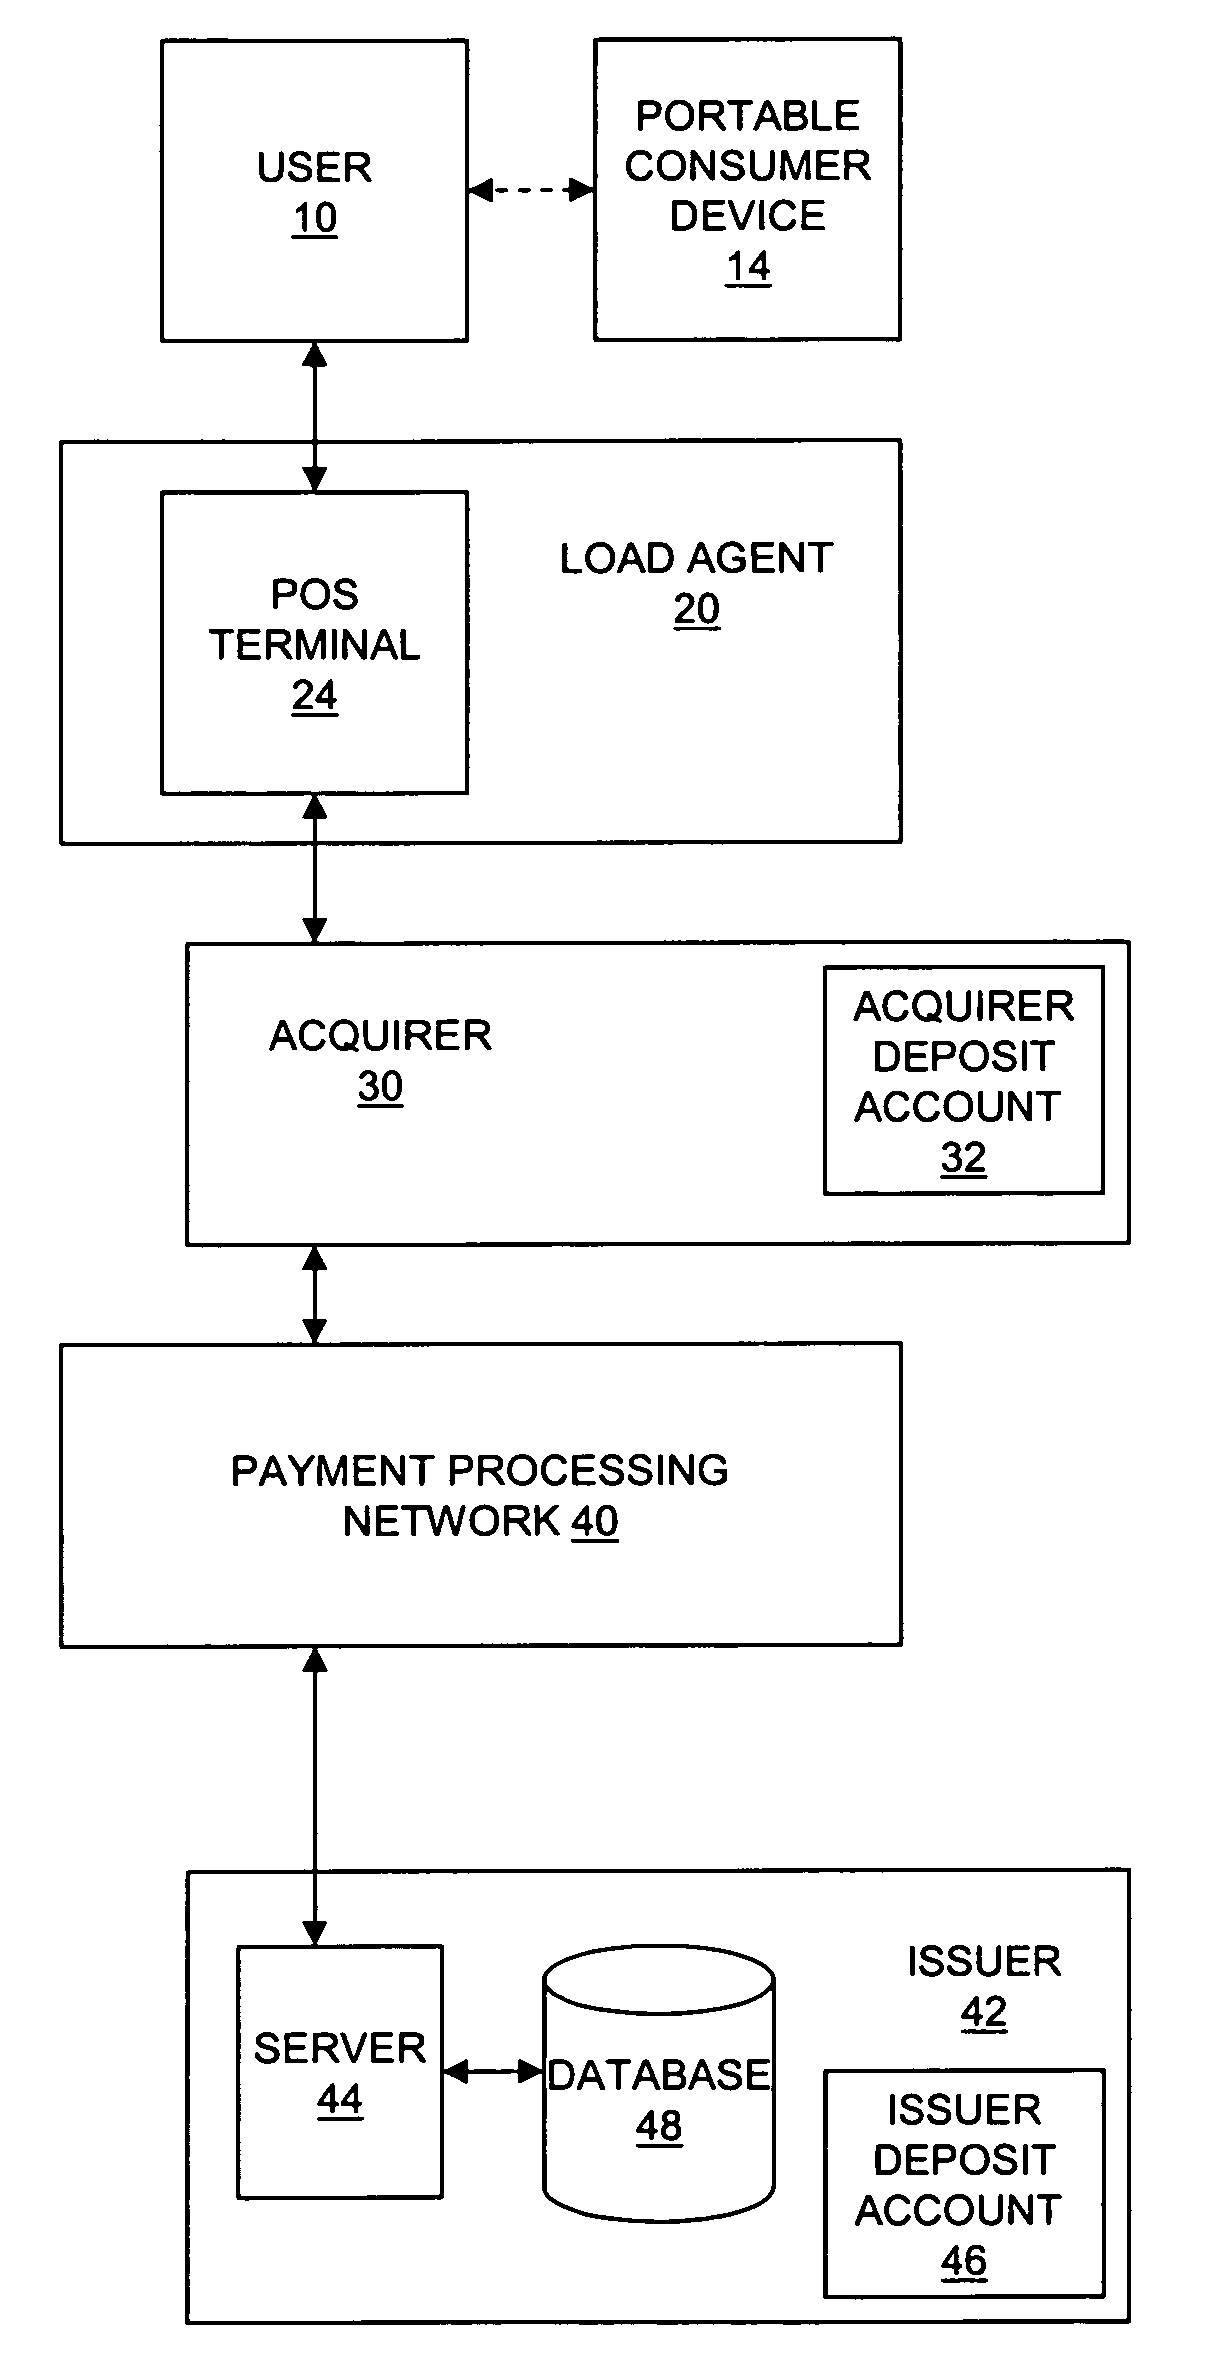 Method and system for loading and reloading portable consumer devices